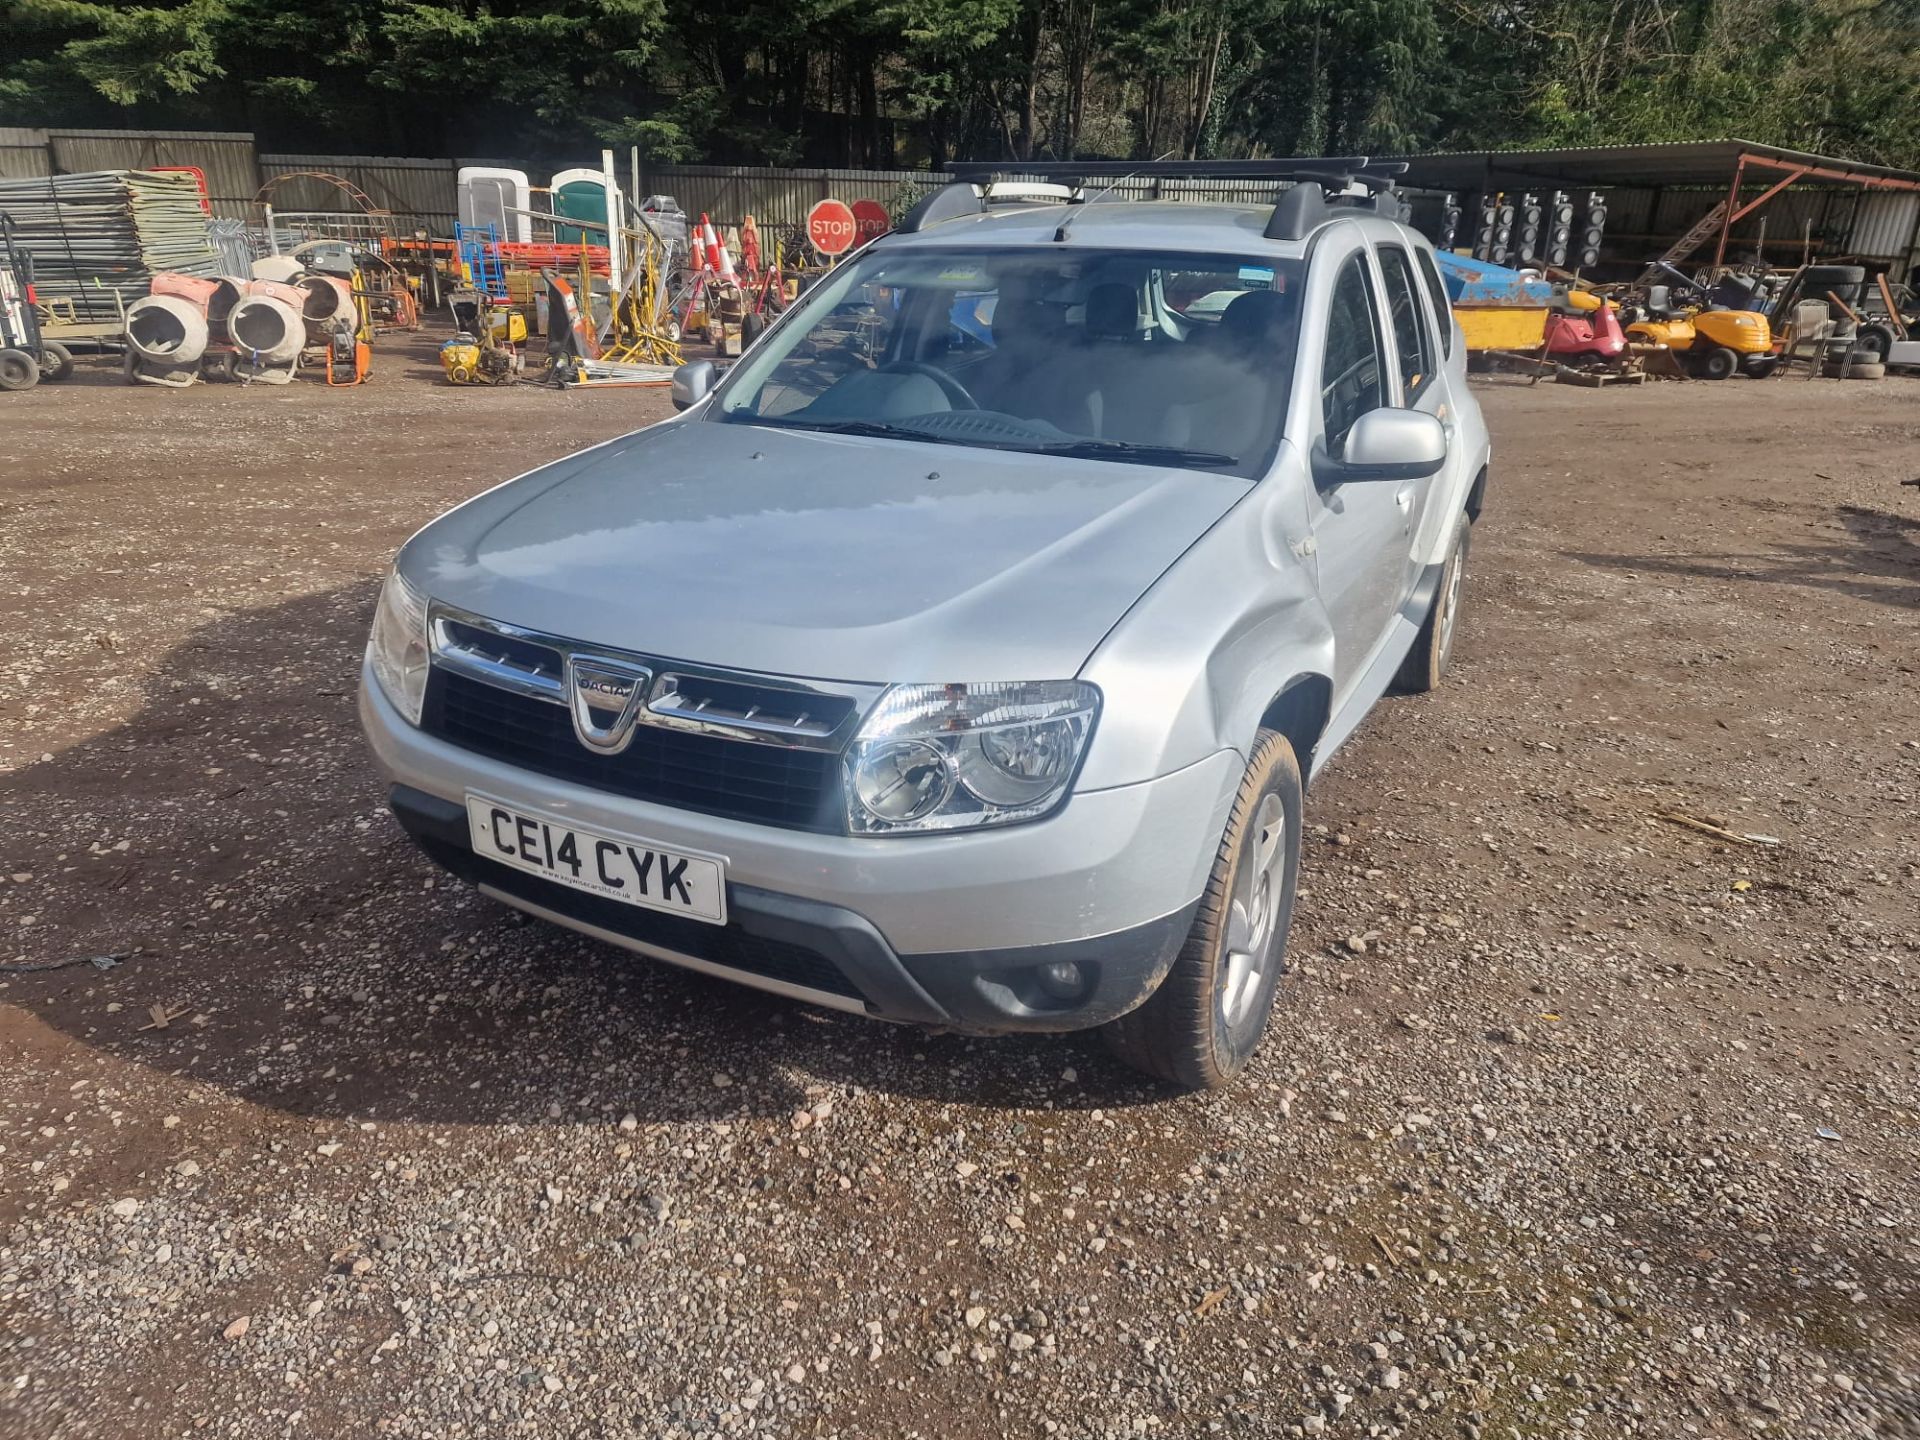 14/14 DACIA DUSTER LAUREATE DCI 4X2 - 1461cc 5dr Hatchback (Silver) - Image 10 of 12